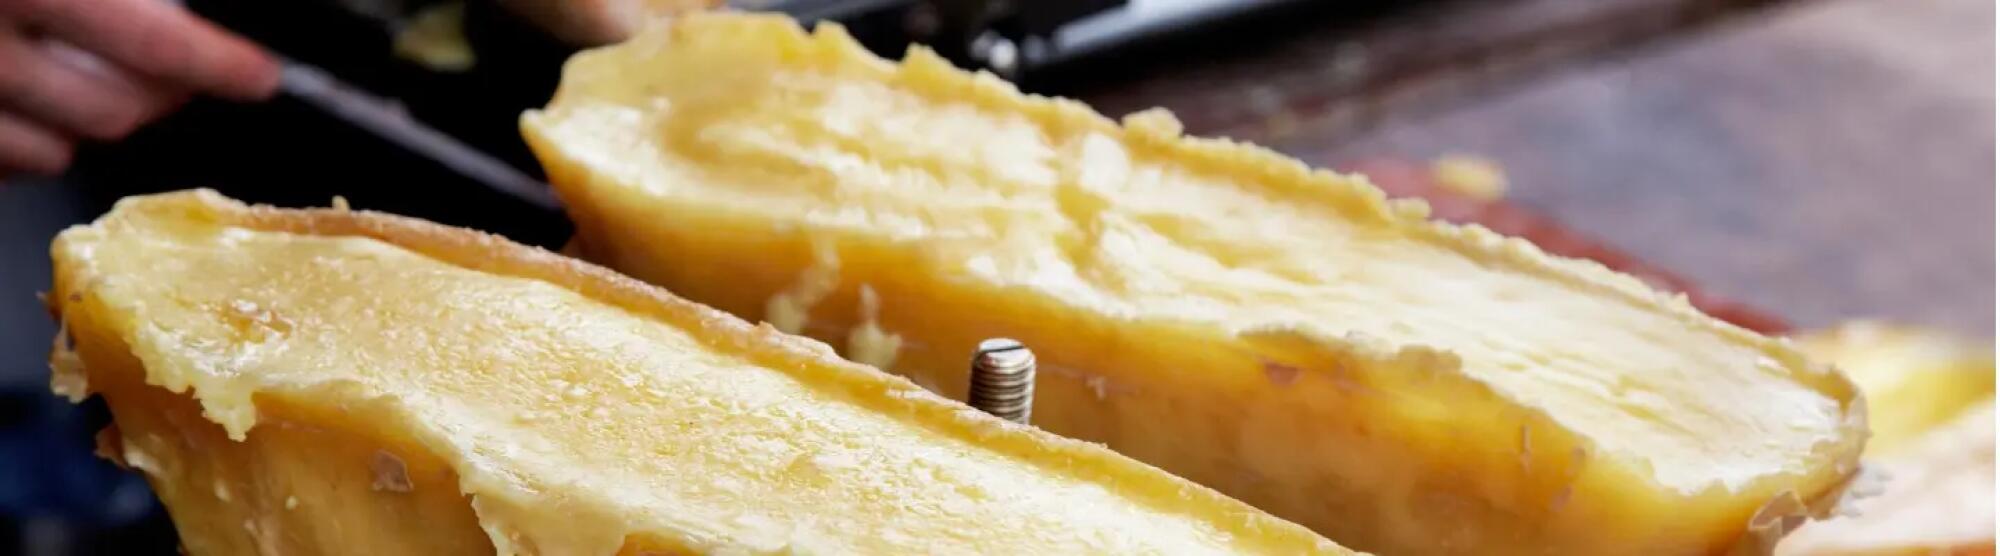 LA02_closeup-view-of-raclette-cheese-picture-id182908050